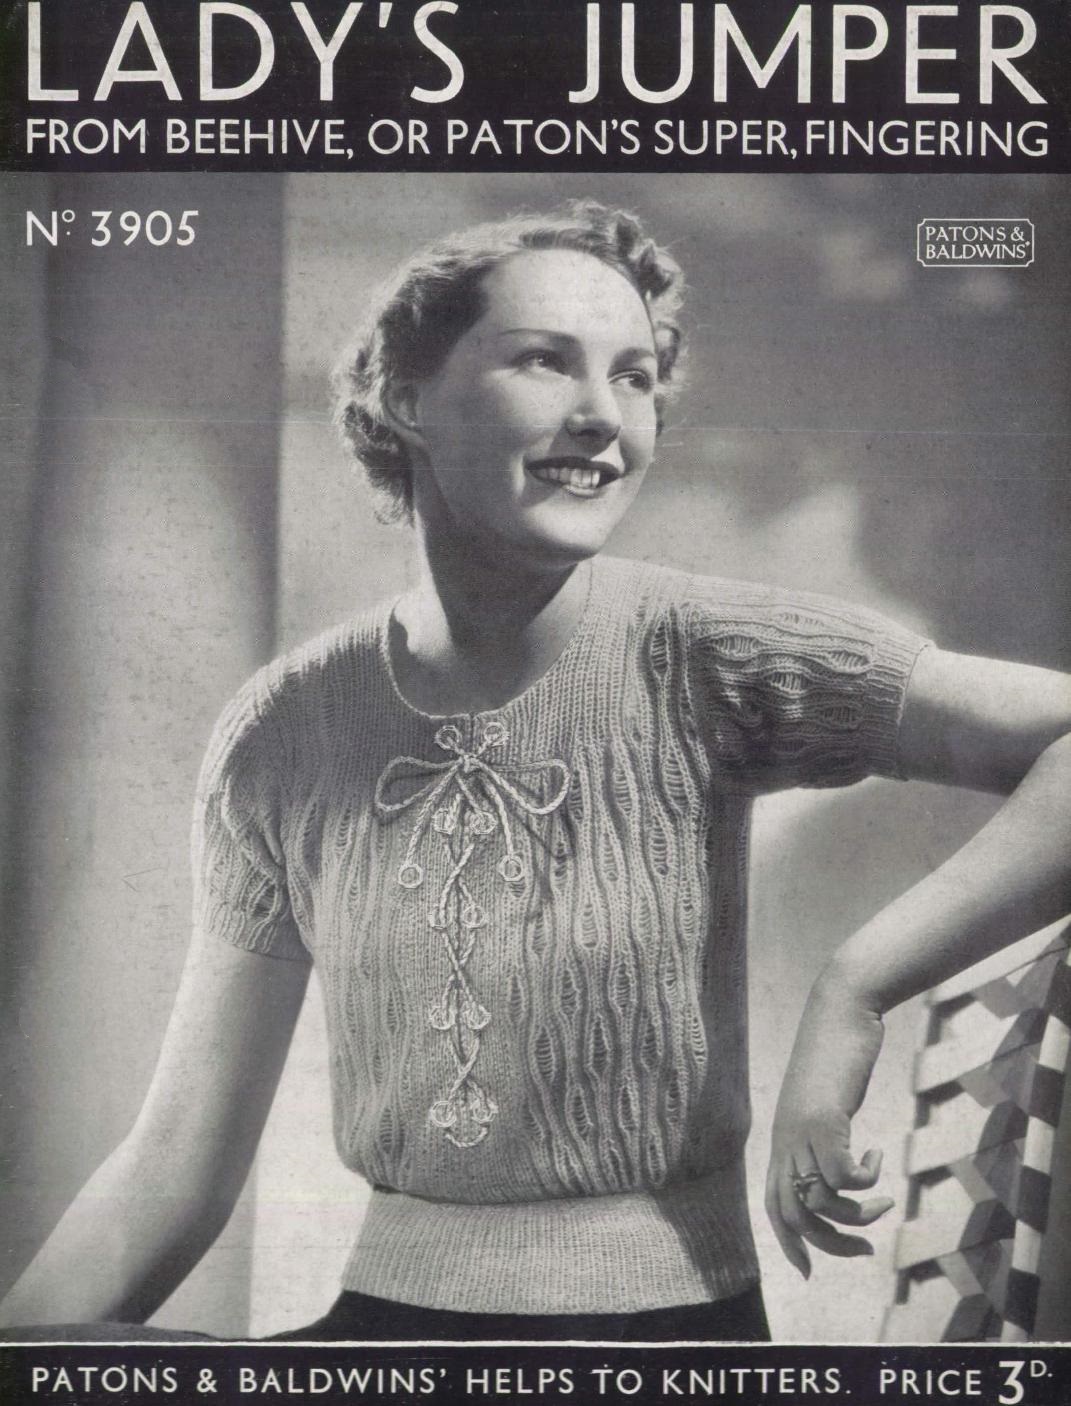 Cover of Patons & Baldwins Helps to Knitters No 3905 - Lady's jumber from Beehive or Patons super, fingering. SHows lady wearing short sleeved jumper with cabled design with featured lace tie at front.